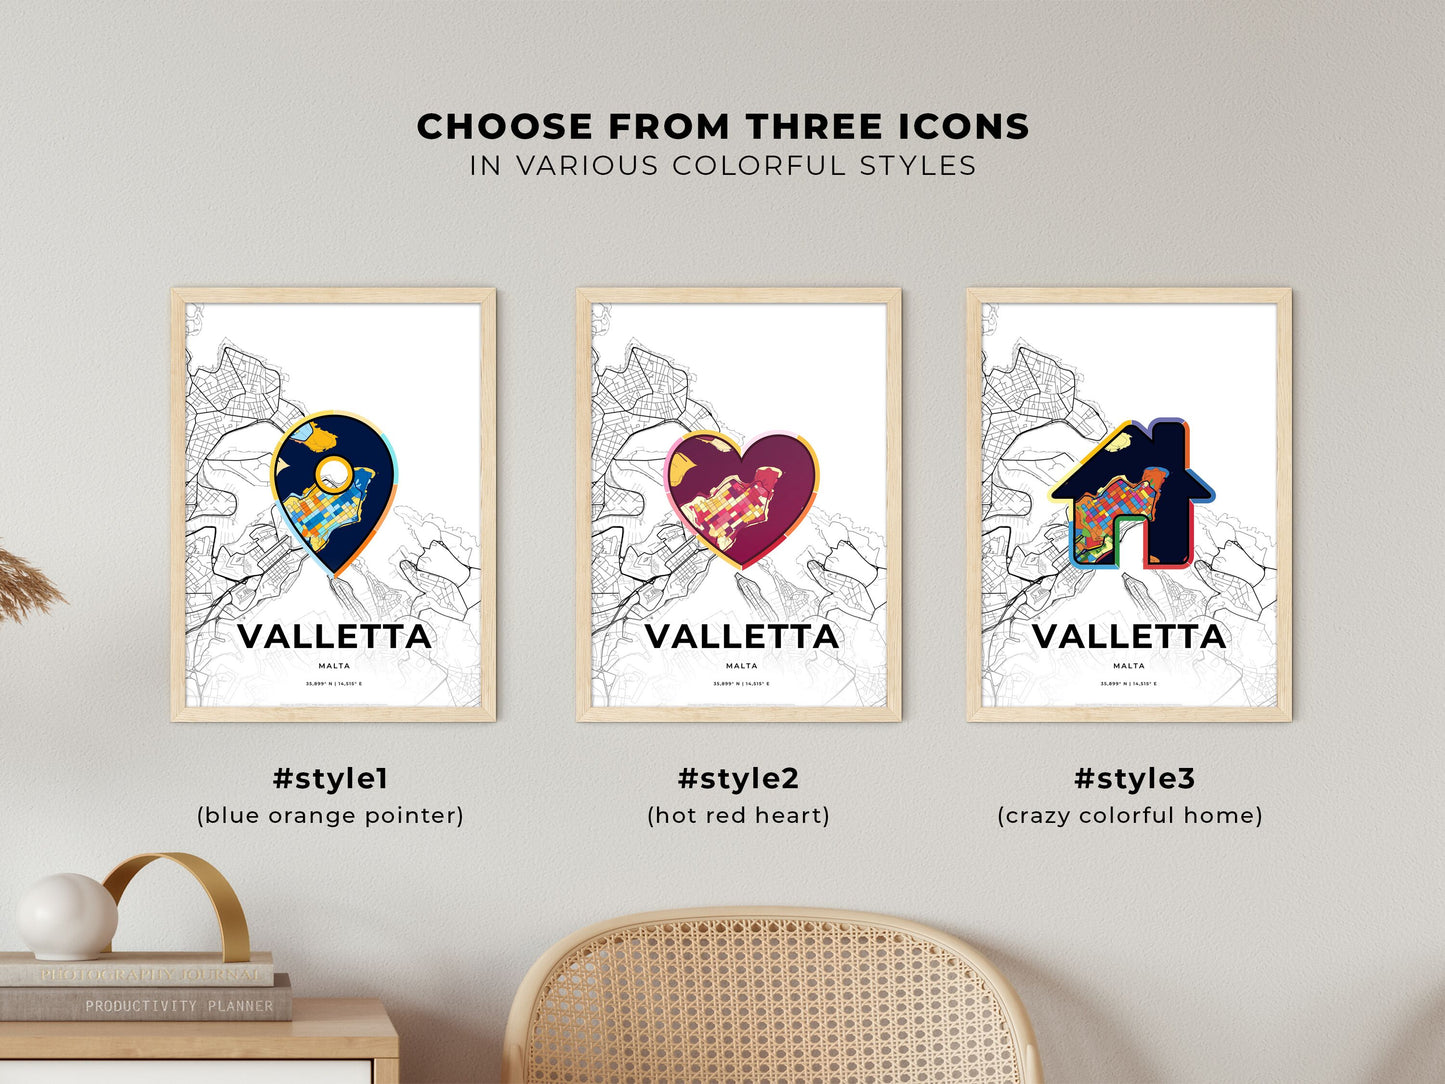 VALLETTA MALTA minimal art map with a colorful icon. Where it all began, Couple map gift.